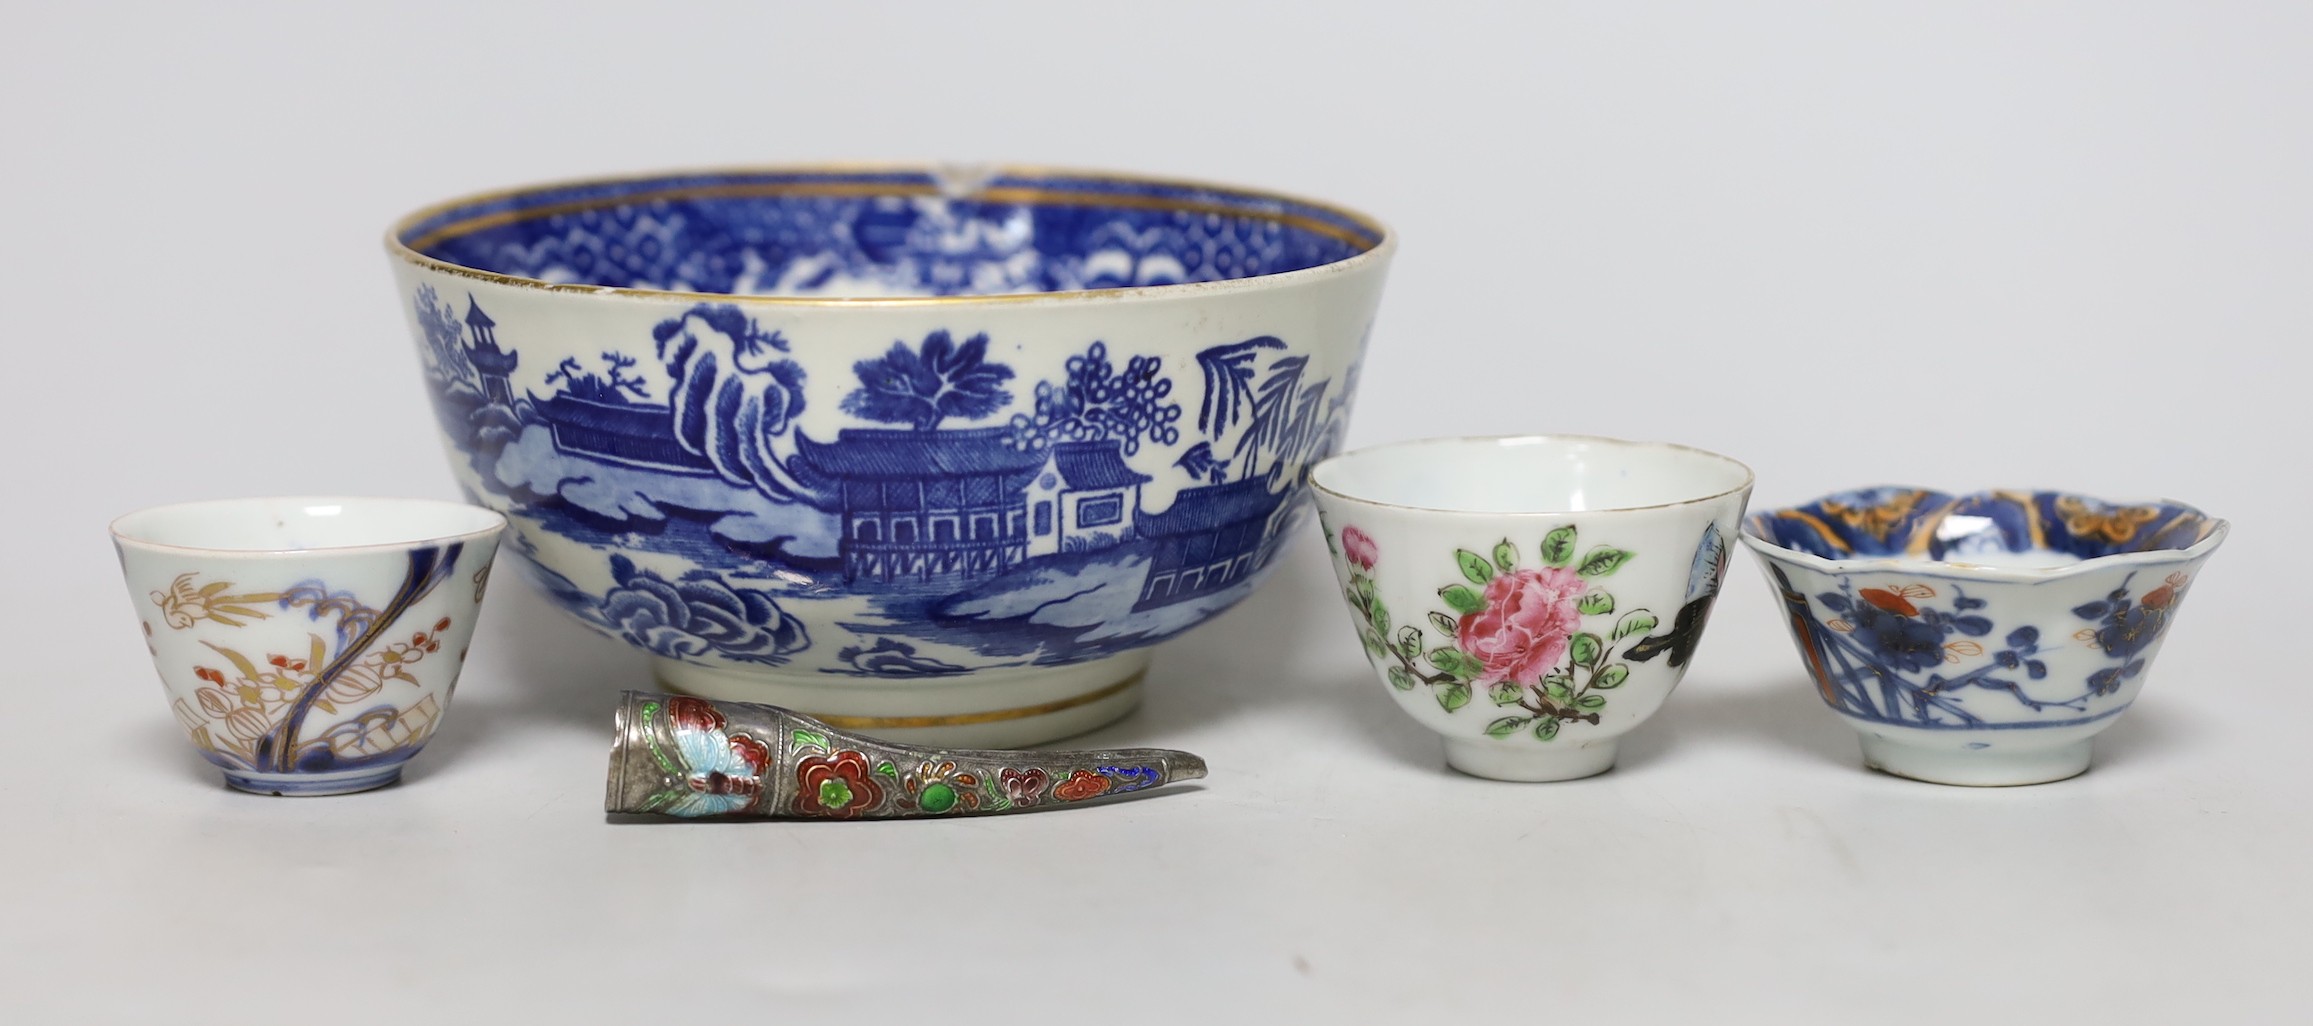 An English porcelain blue and white slop bowl, 15cm diameter, together with three miniature